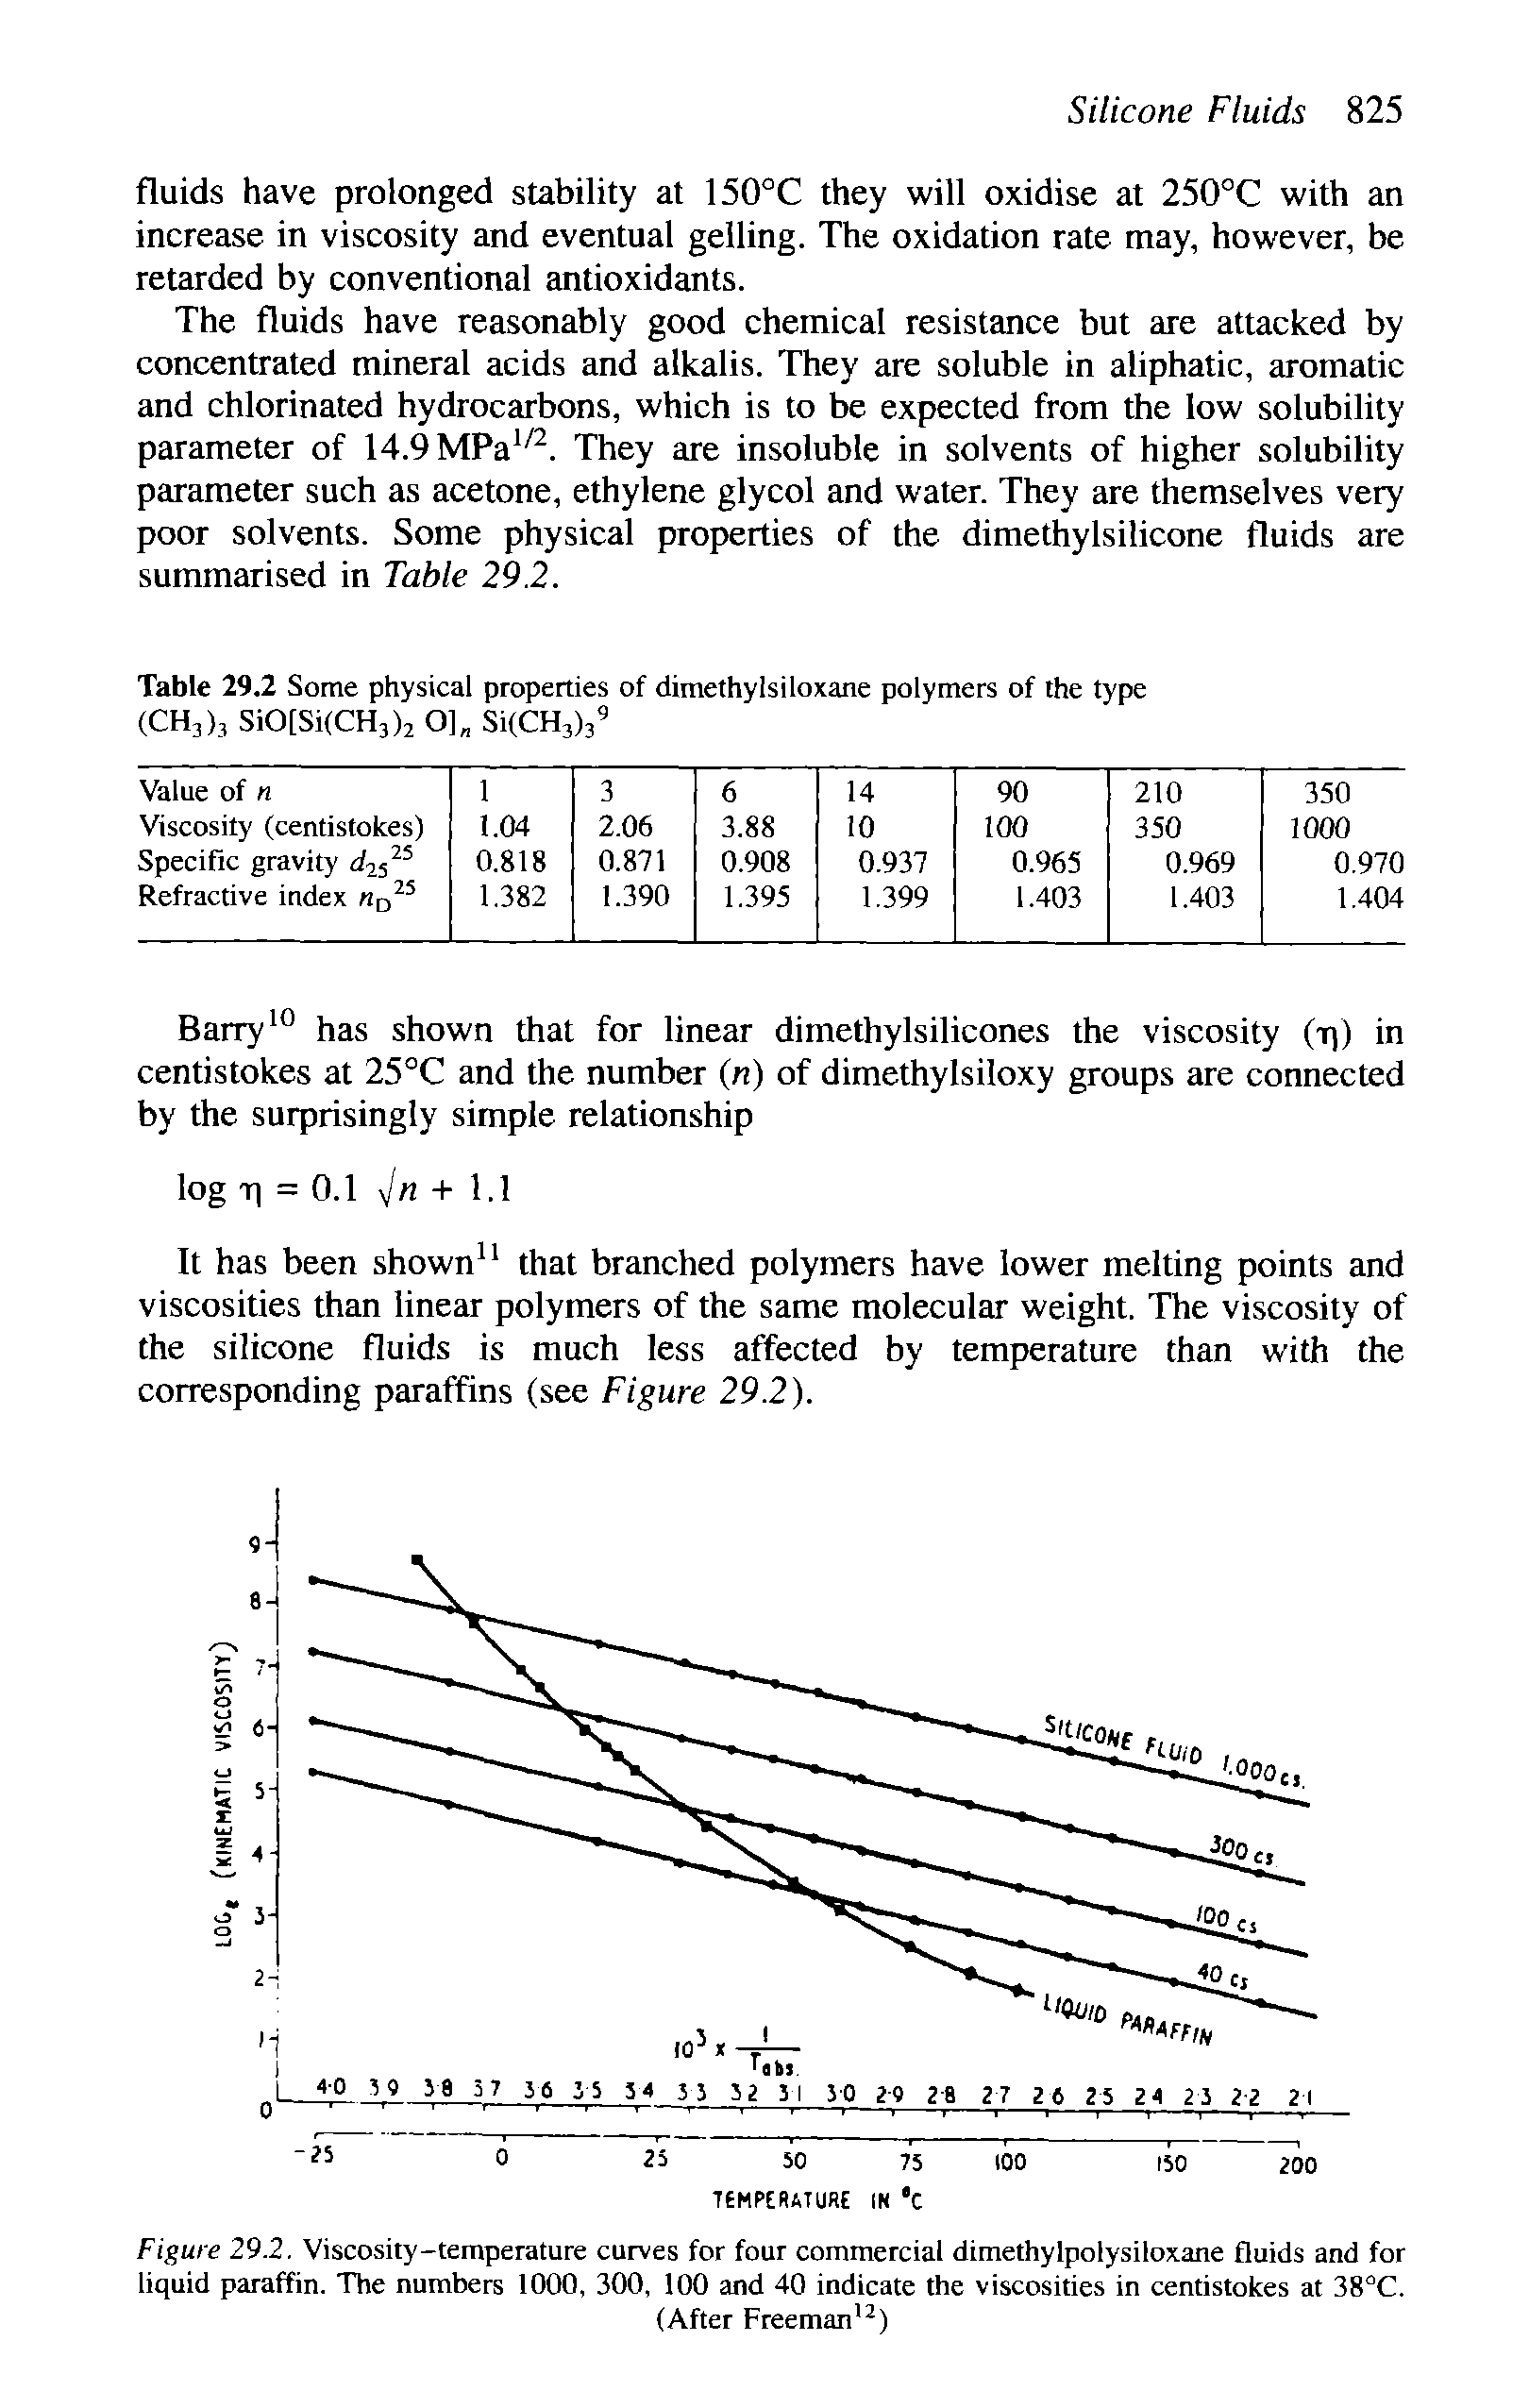 Figure 29.2. Viscosity-temperature curves for four commercial dimethylpolysiloxane fluids and for liquid paraffin. The numbers 1000, 300, 100 and 40 indicate the viscosities in centistokes at 38°C.